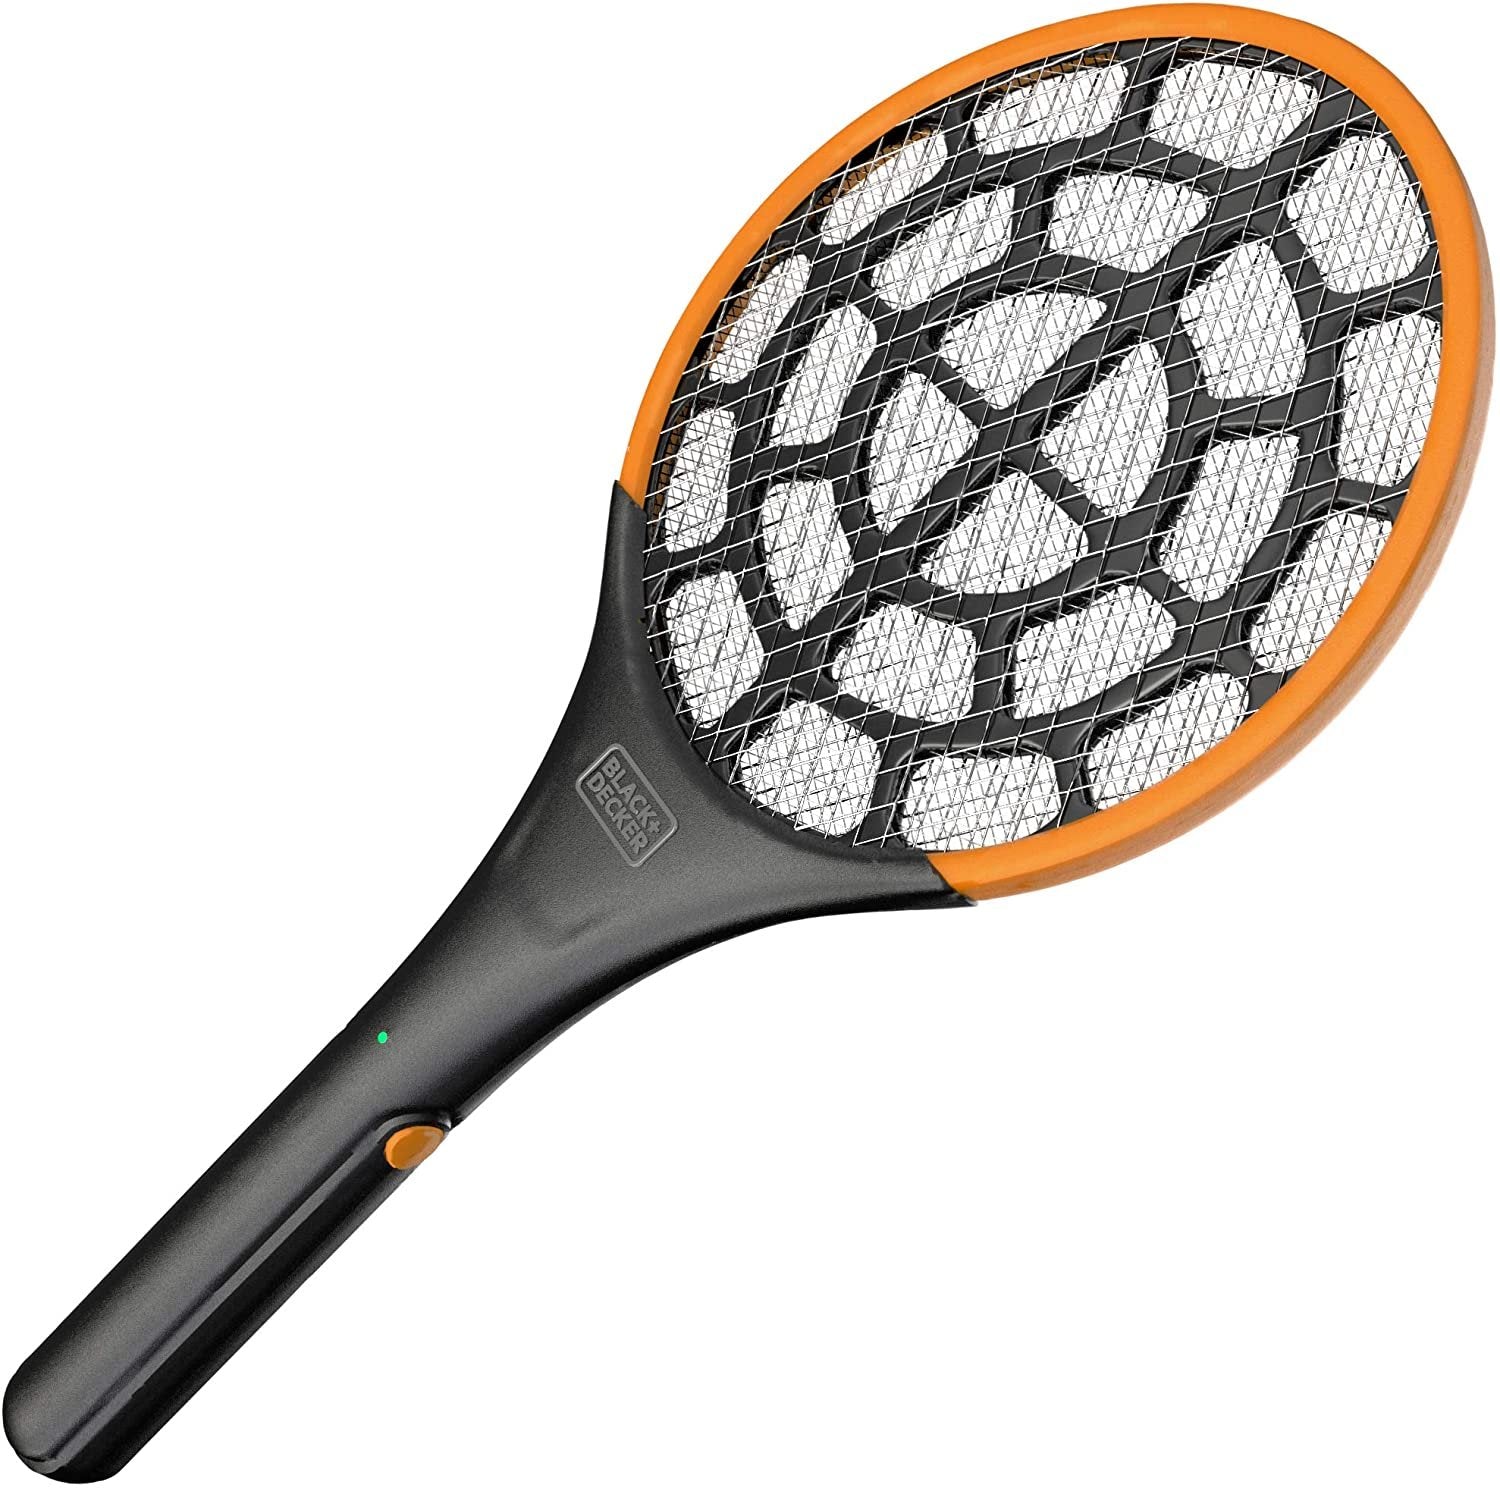 Black+Decker Electric Fly Swatter Zapper Racket- PRO 2.0 Size- Handheld Indoor/Outdoor- Non-Toxic, Safe for Humans & Pets